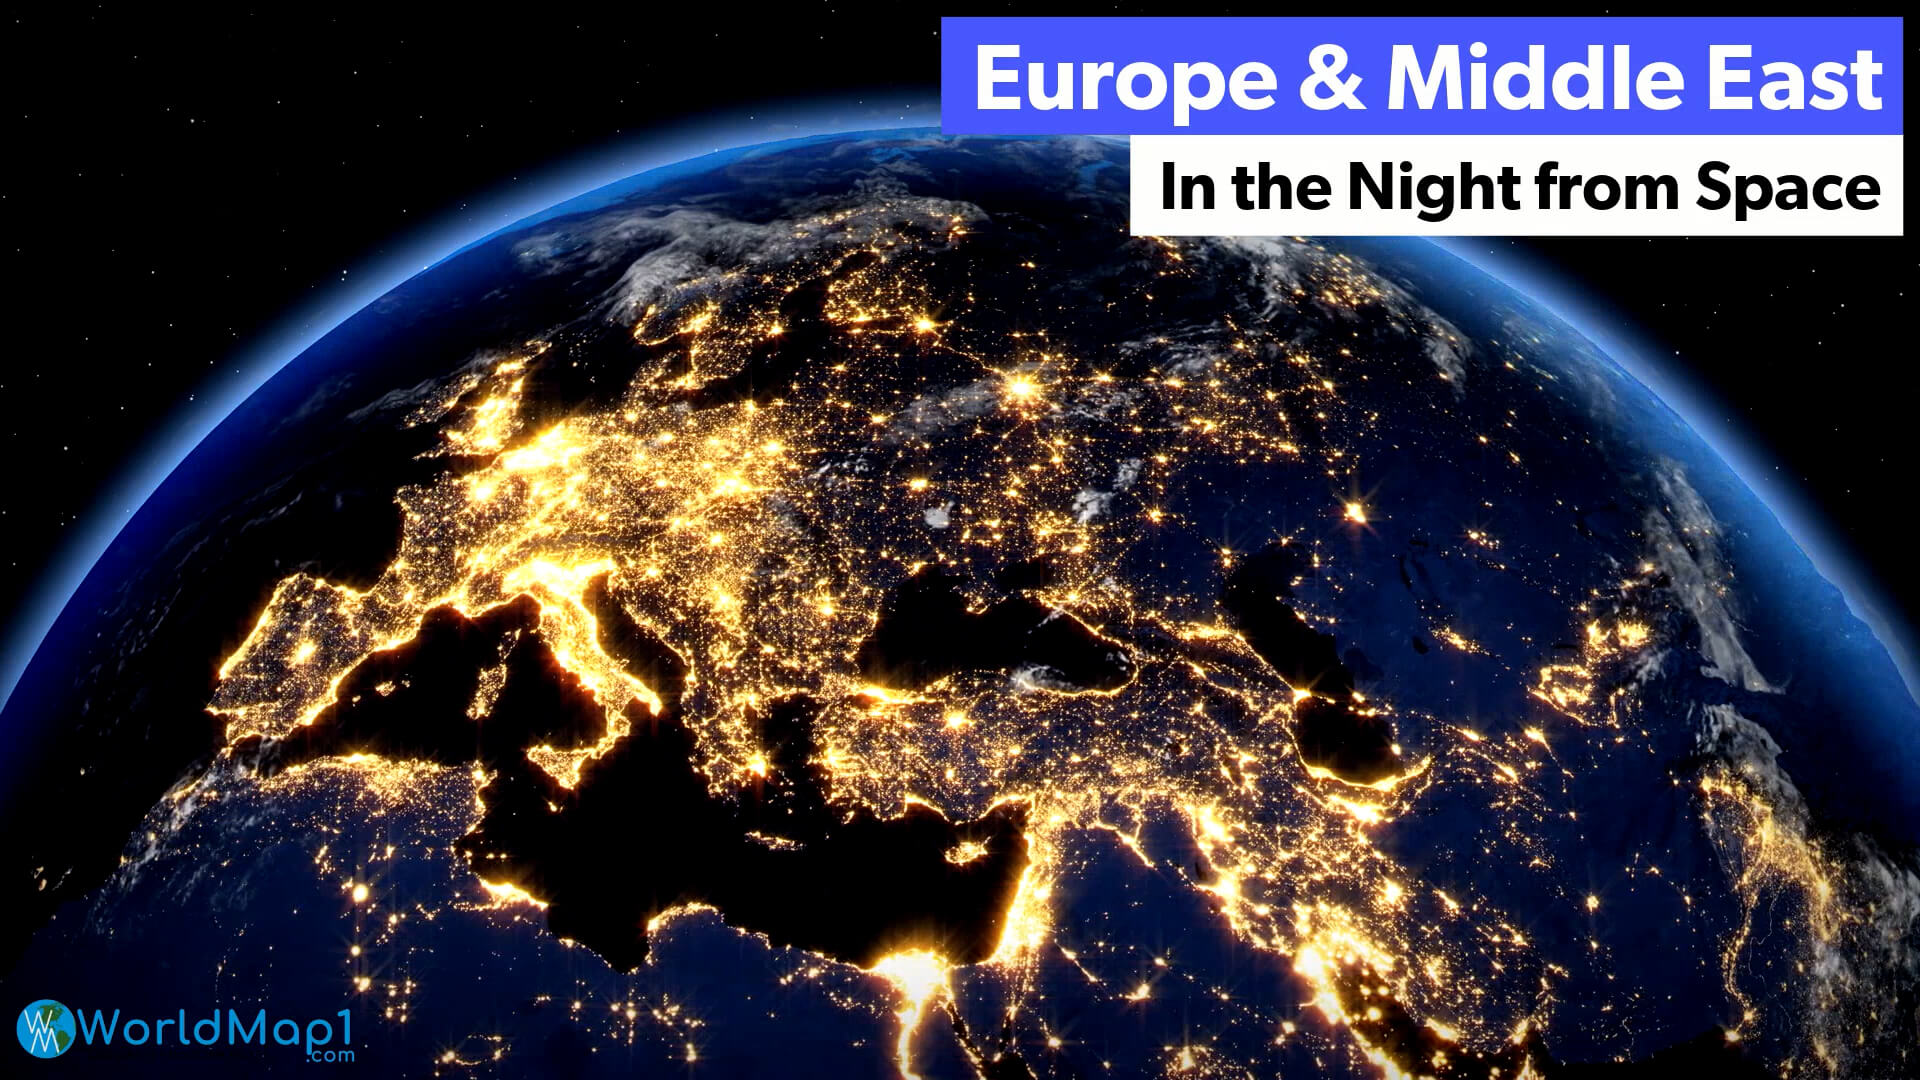 Europe and Middle East in the Night from Space